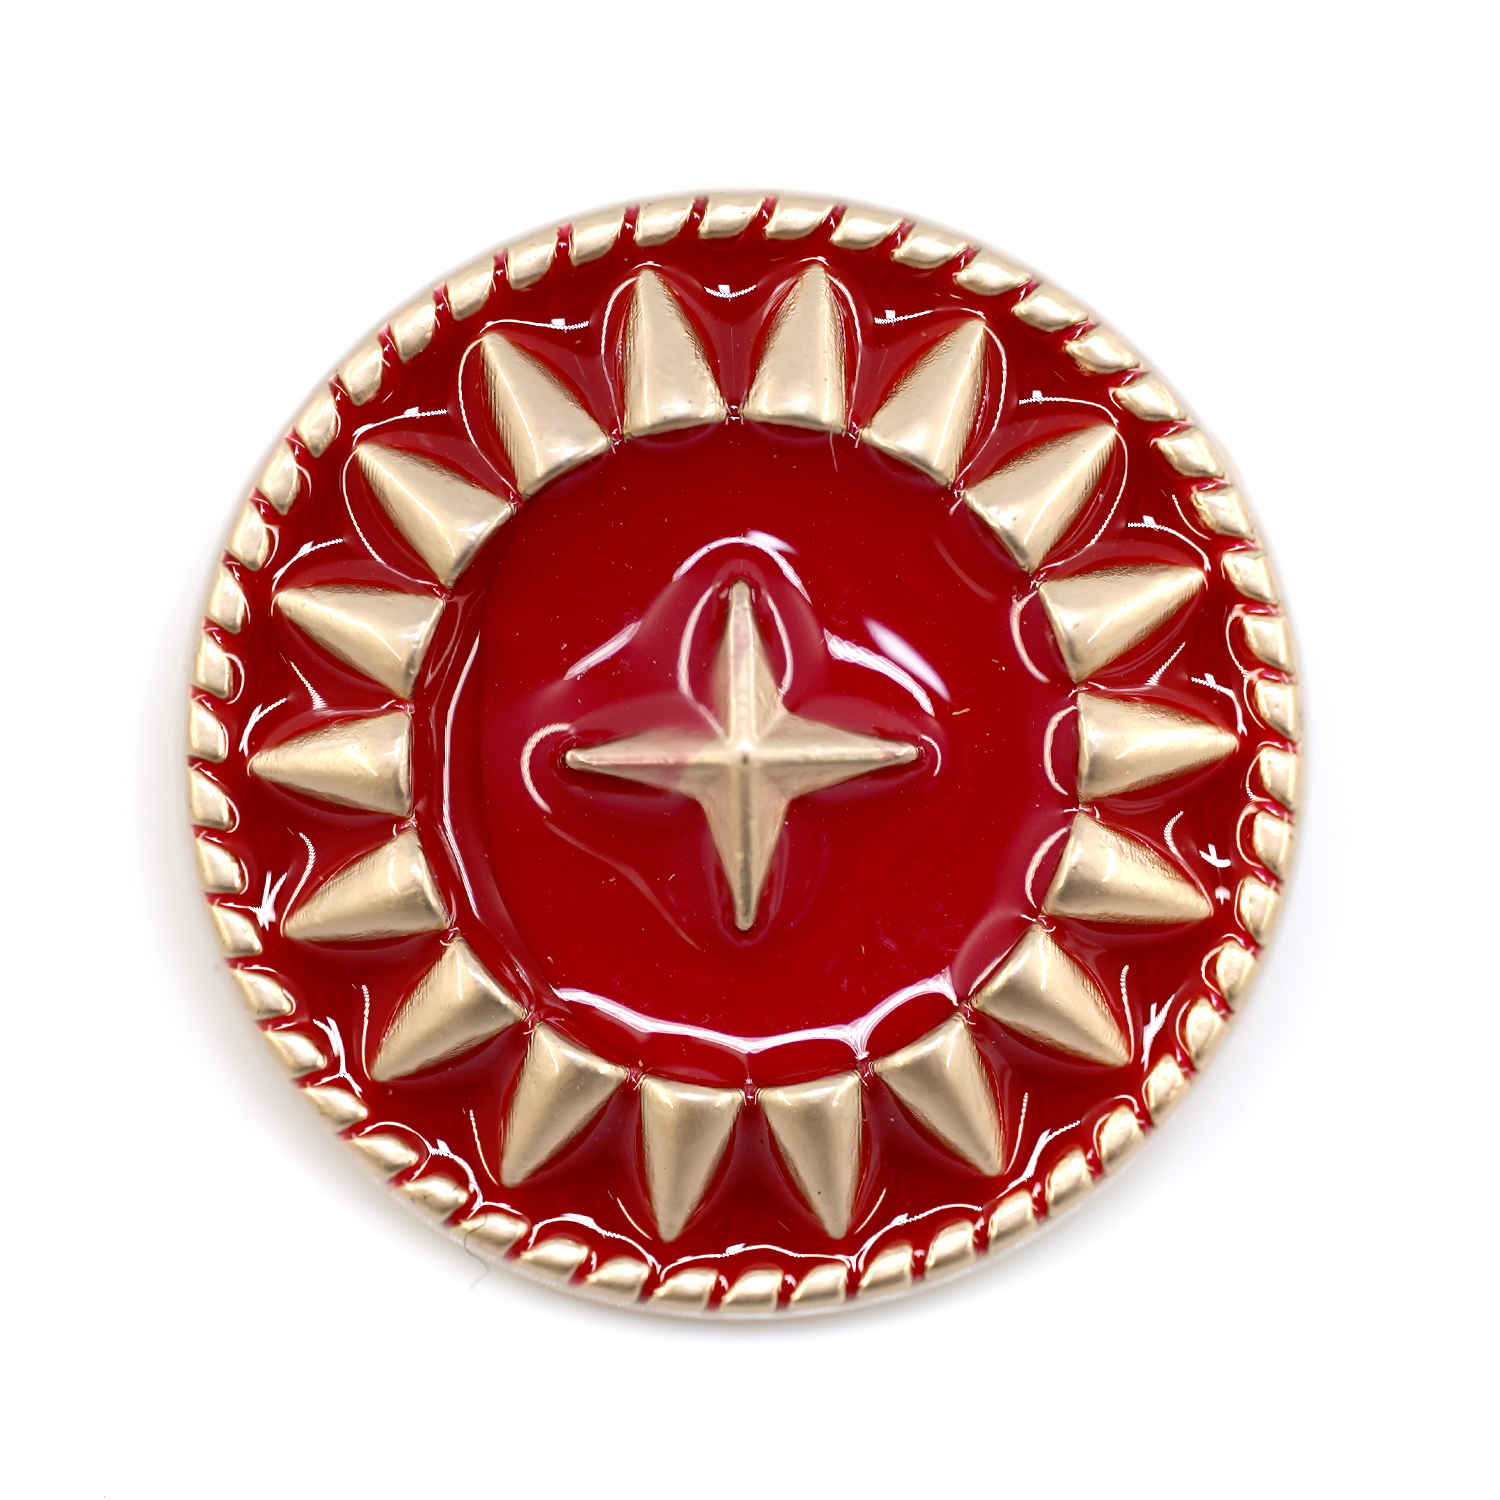 Craftisum 20 pcs Color Contrast Golden Star Red Enamel Sewing Metal Shank Buttons for Coats -25mm -1"